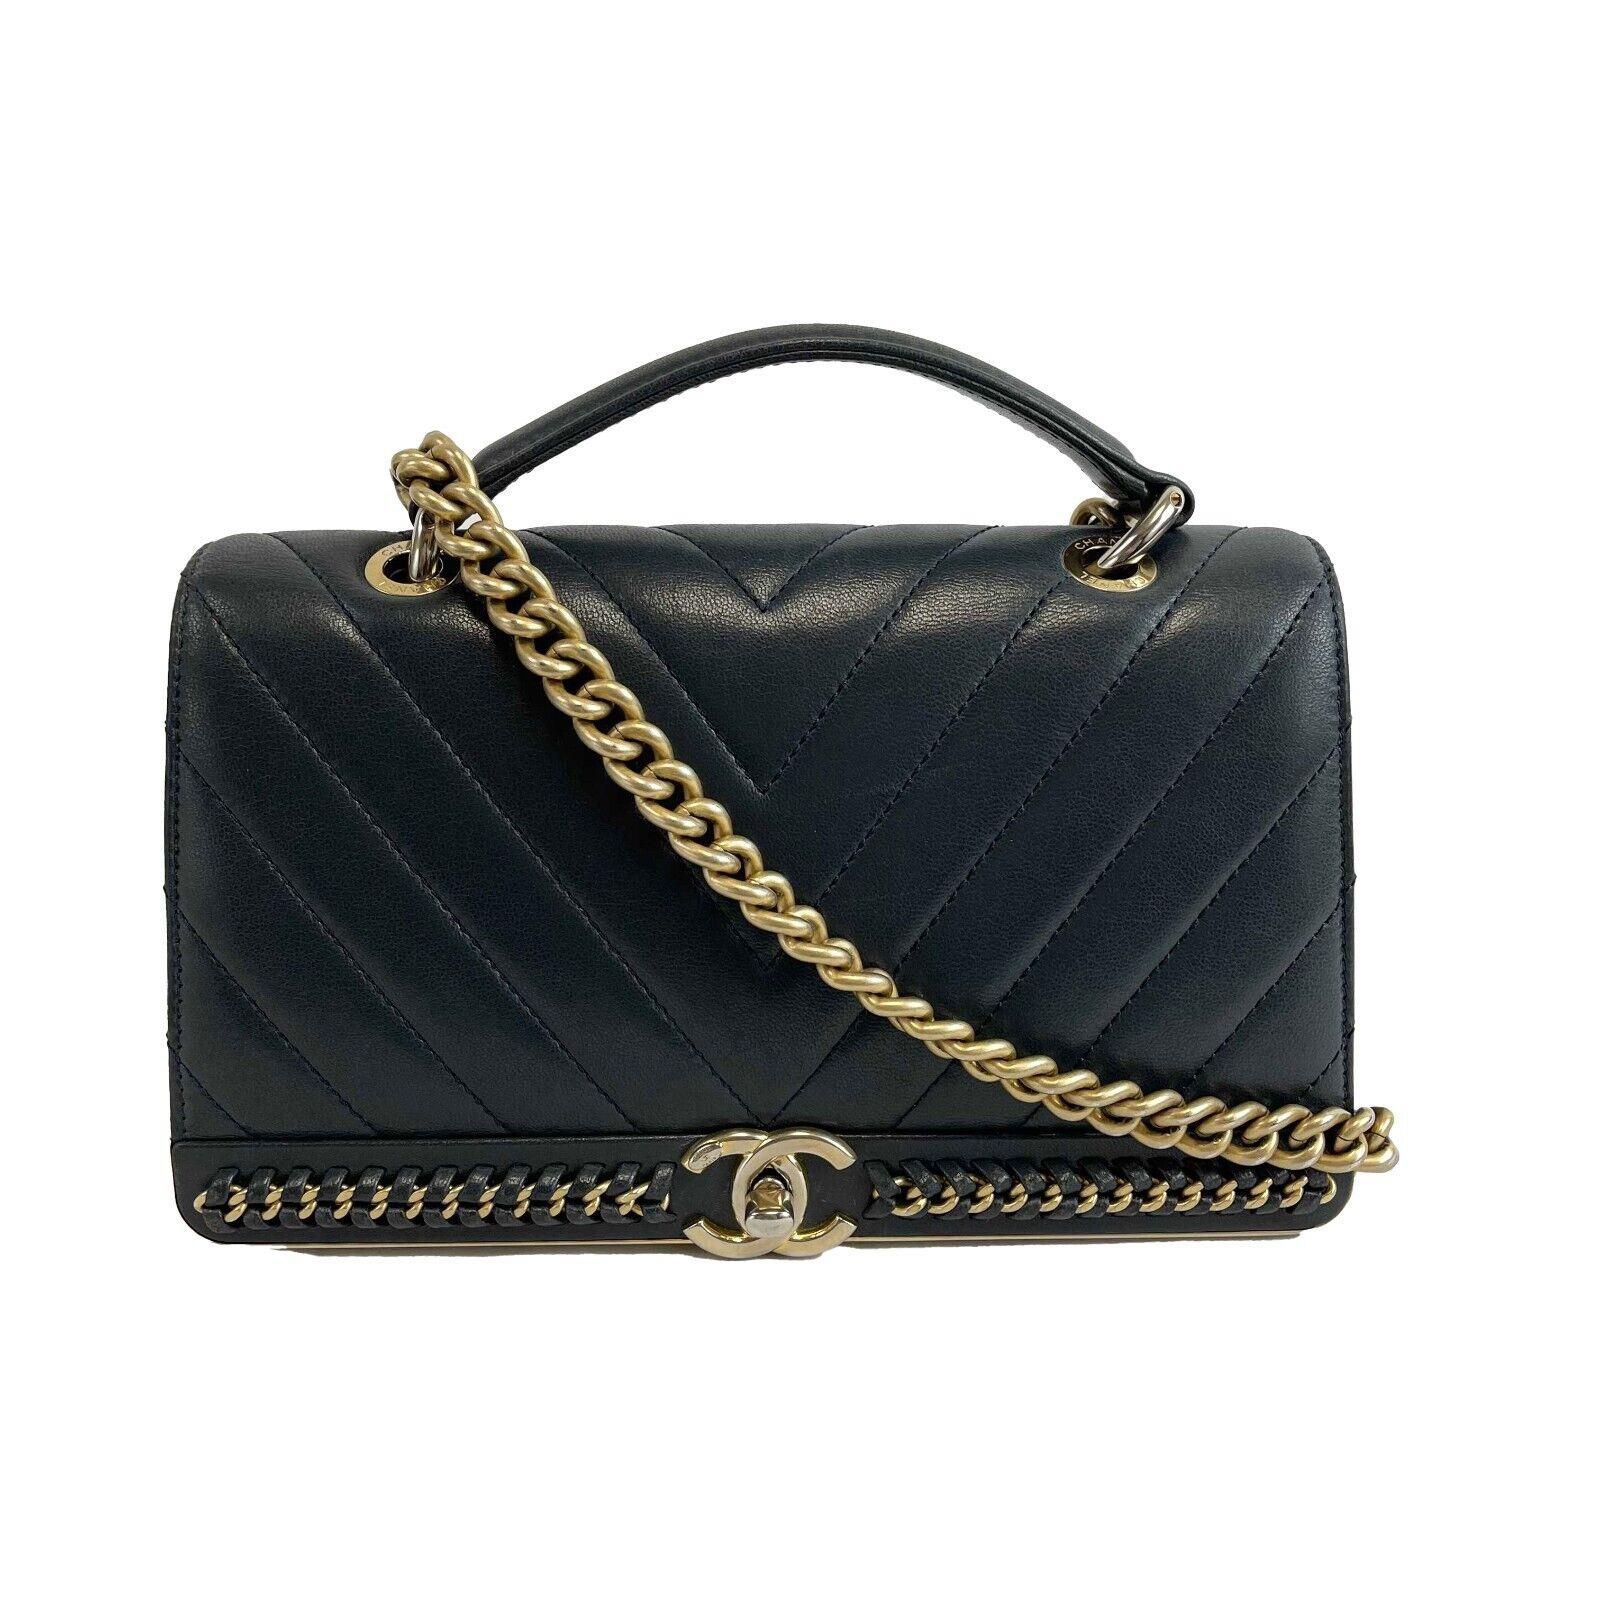 CHANEL - 2Way Bag V Stitch CC Coco Mark Black Leather Top Handle Crossbody
Description

Chevron stitched
Leather and aged gold chain detail on front
Leather top handle
Shoulder chain with a leather shoulder pad
Aged gold Chanel CC turn lock
Exterior